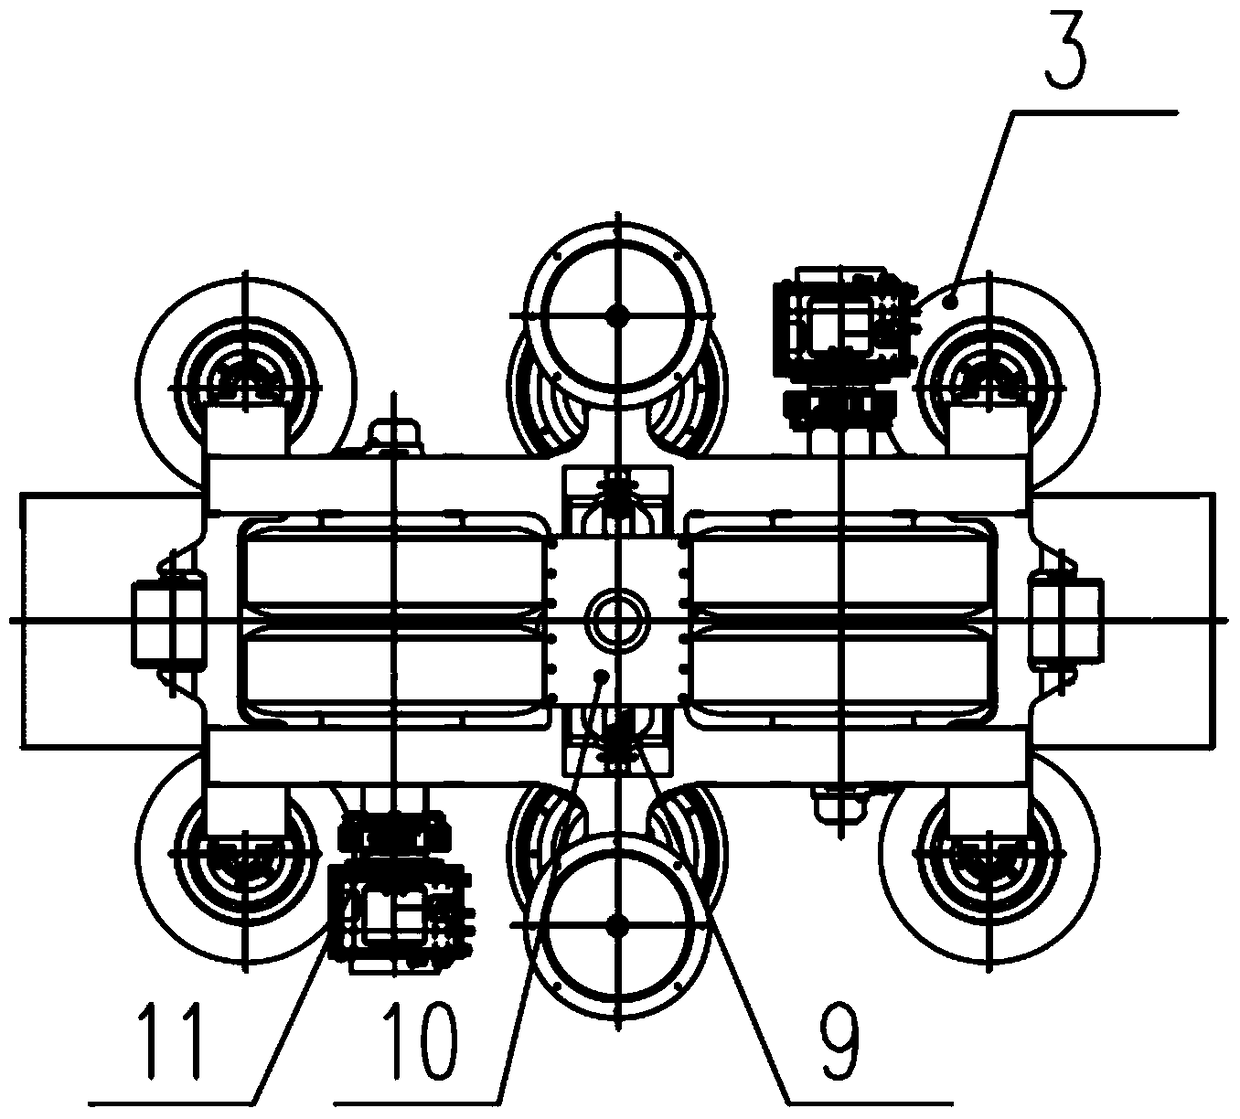 A direct drive straddle gearless monorail bogie